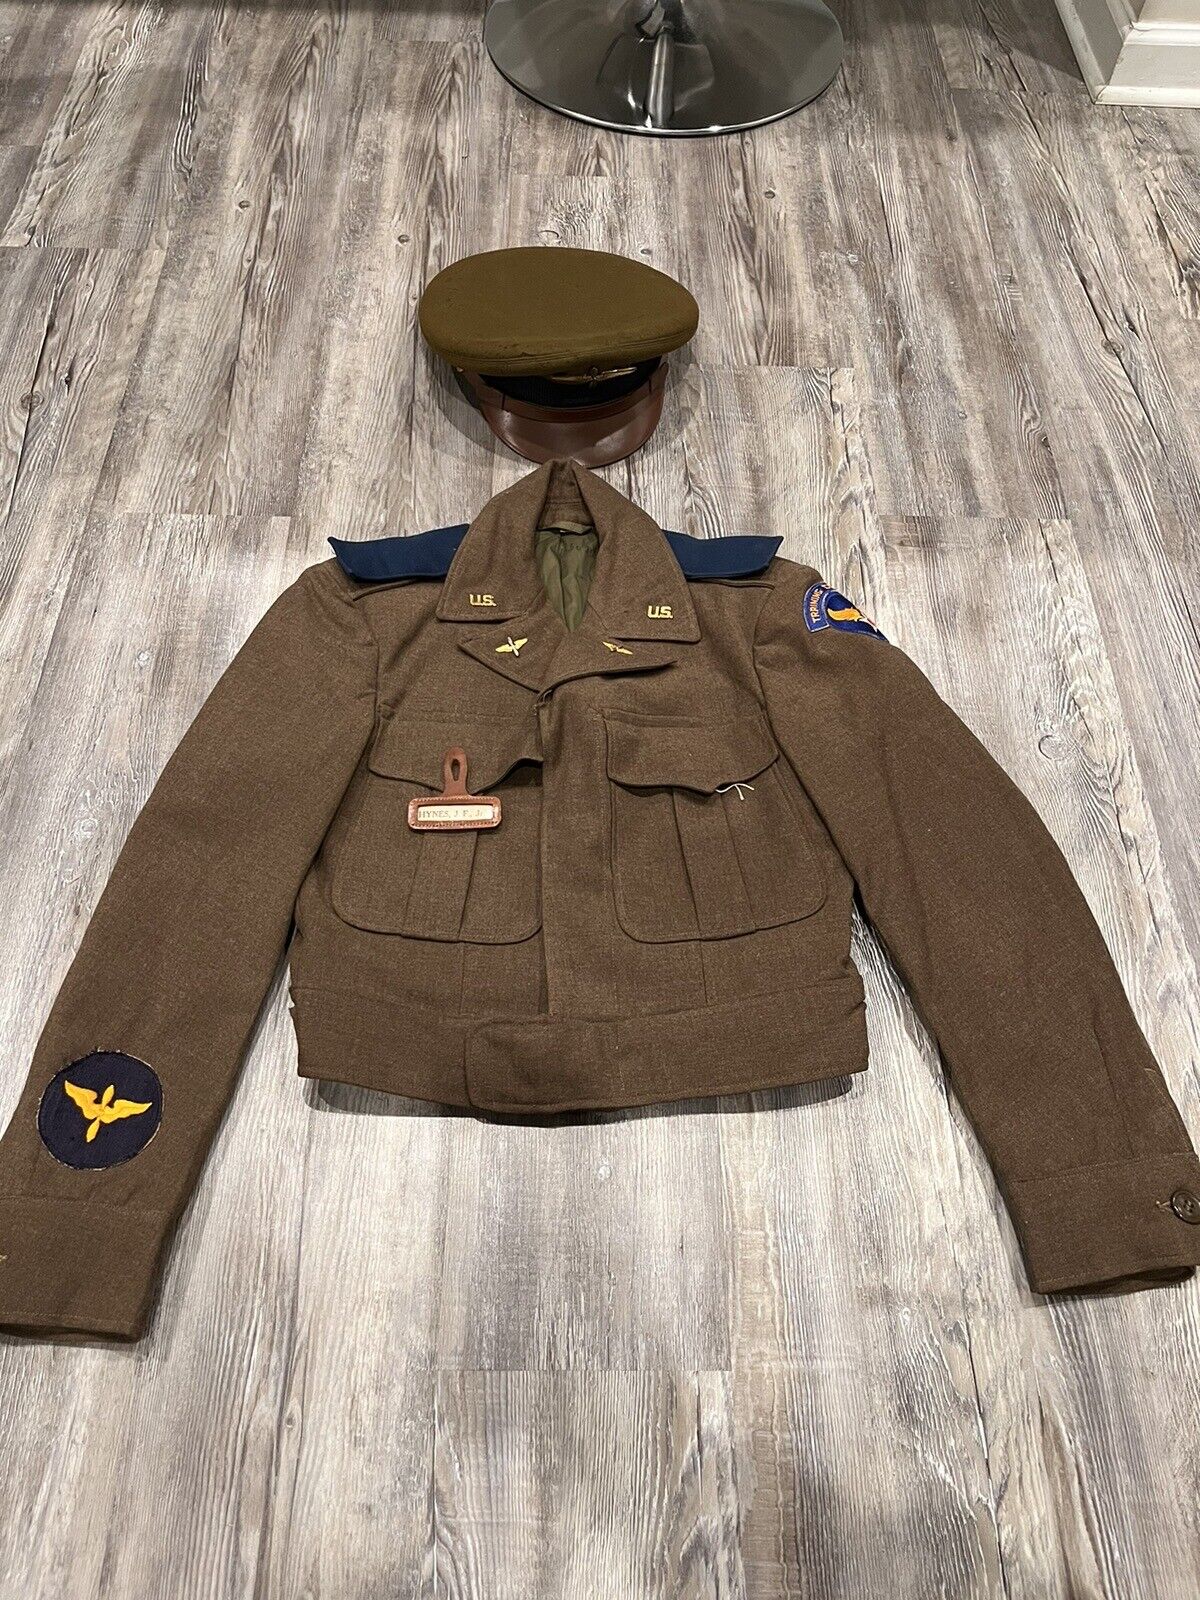 RARE NAMED WWII POST WW2 Air Force Officer Air Cadet  AAF Jacket Coat And Visor